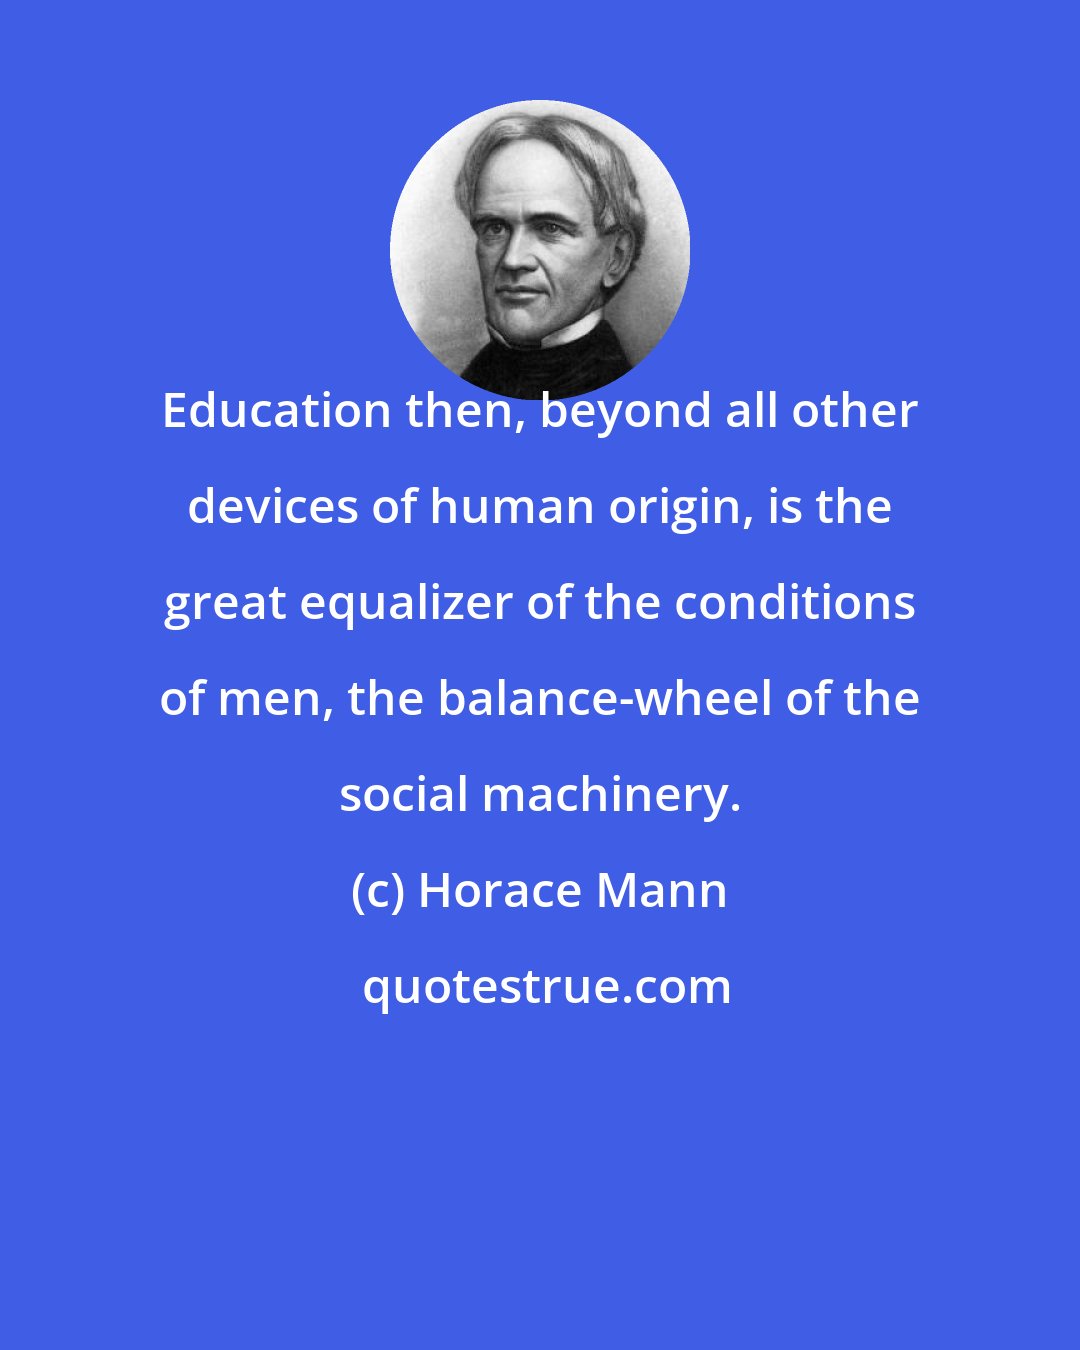 Horace Mann: Education then, beyond all other devices of human origin, is the great equalizer of the conditions of men, the balance-wheel of the social machinery.